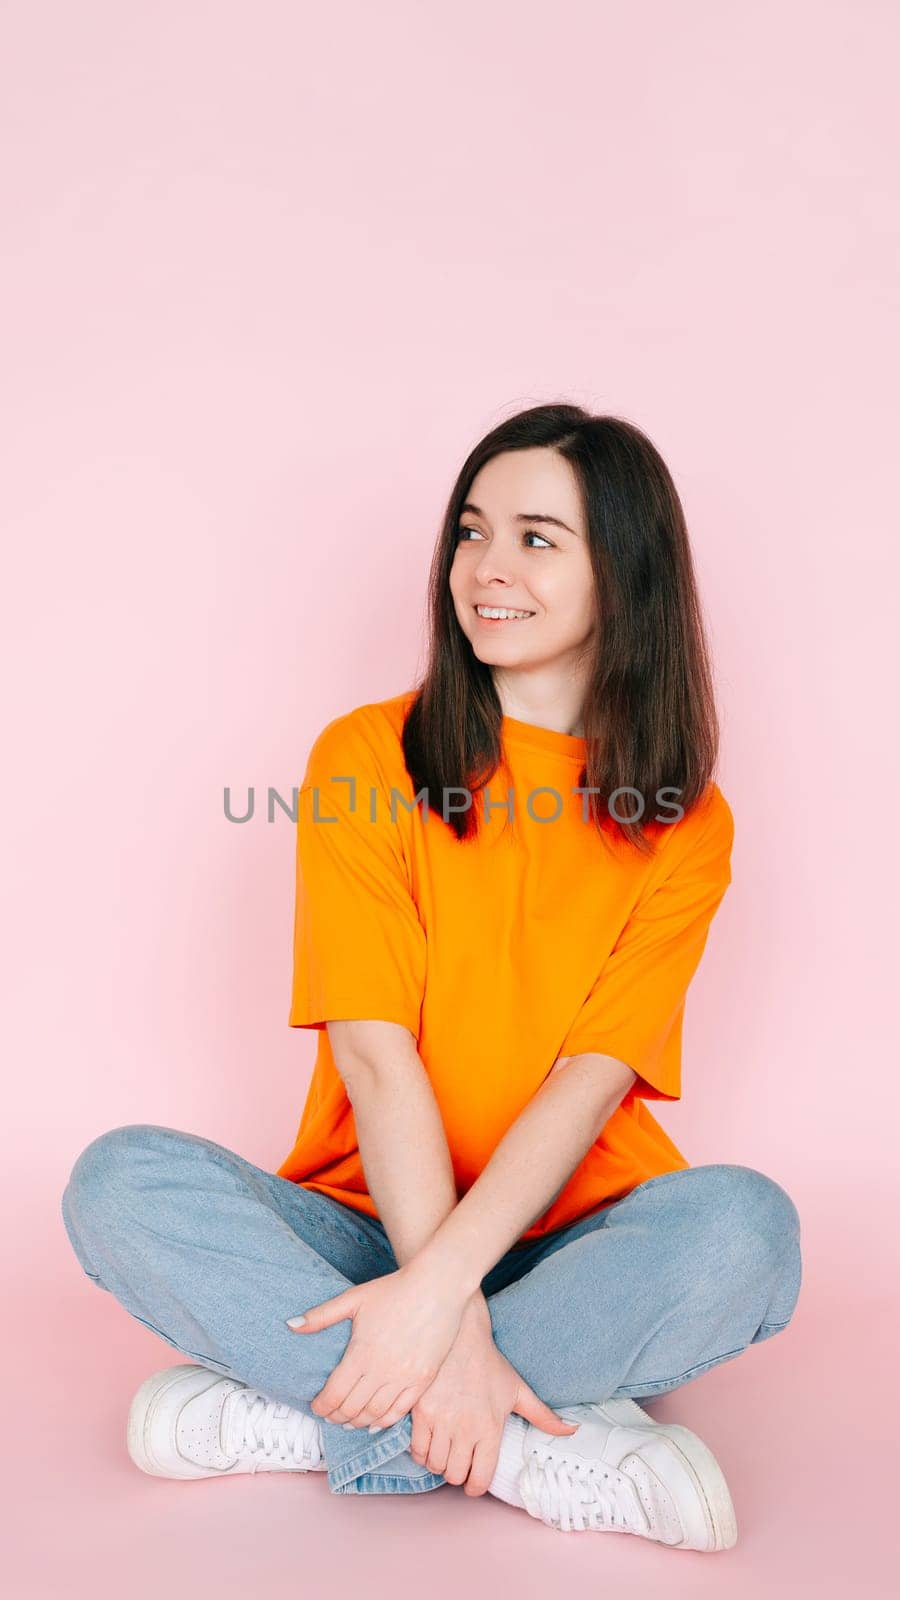 Dreaming in Serenity: Beautiful Woman Seated Comfortably in Lotus Position, Gazing into Empty Space, Yearning for a New Love - Tranquil Mood on Pink Background.